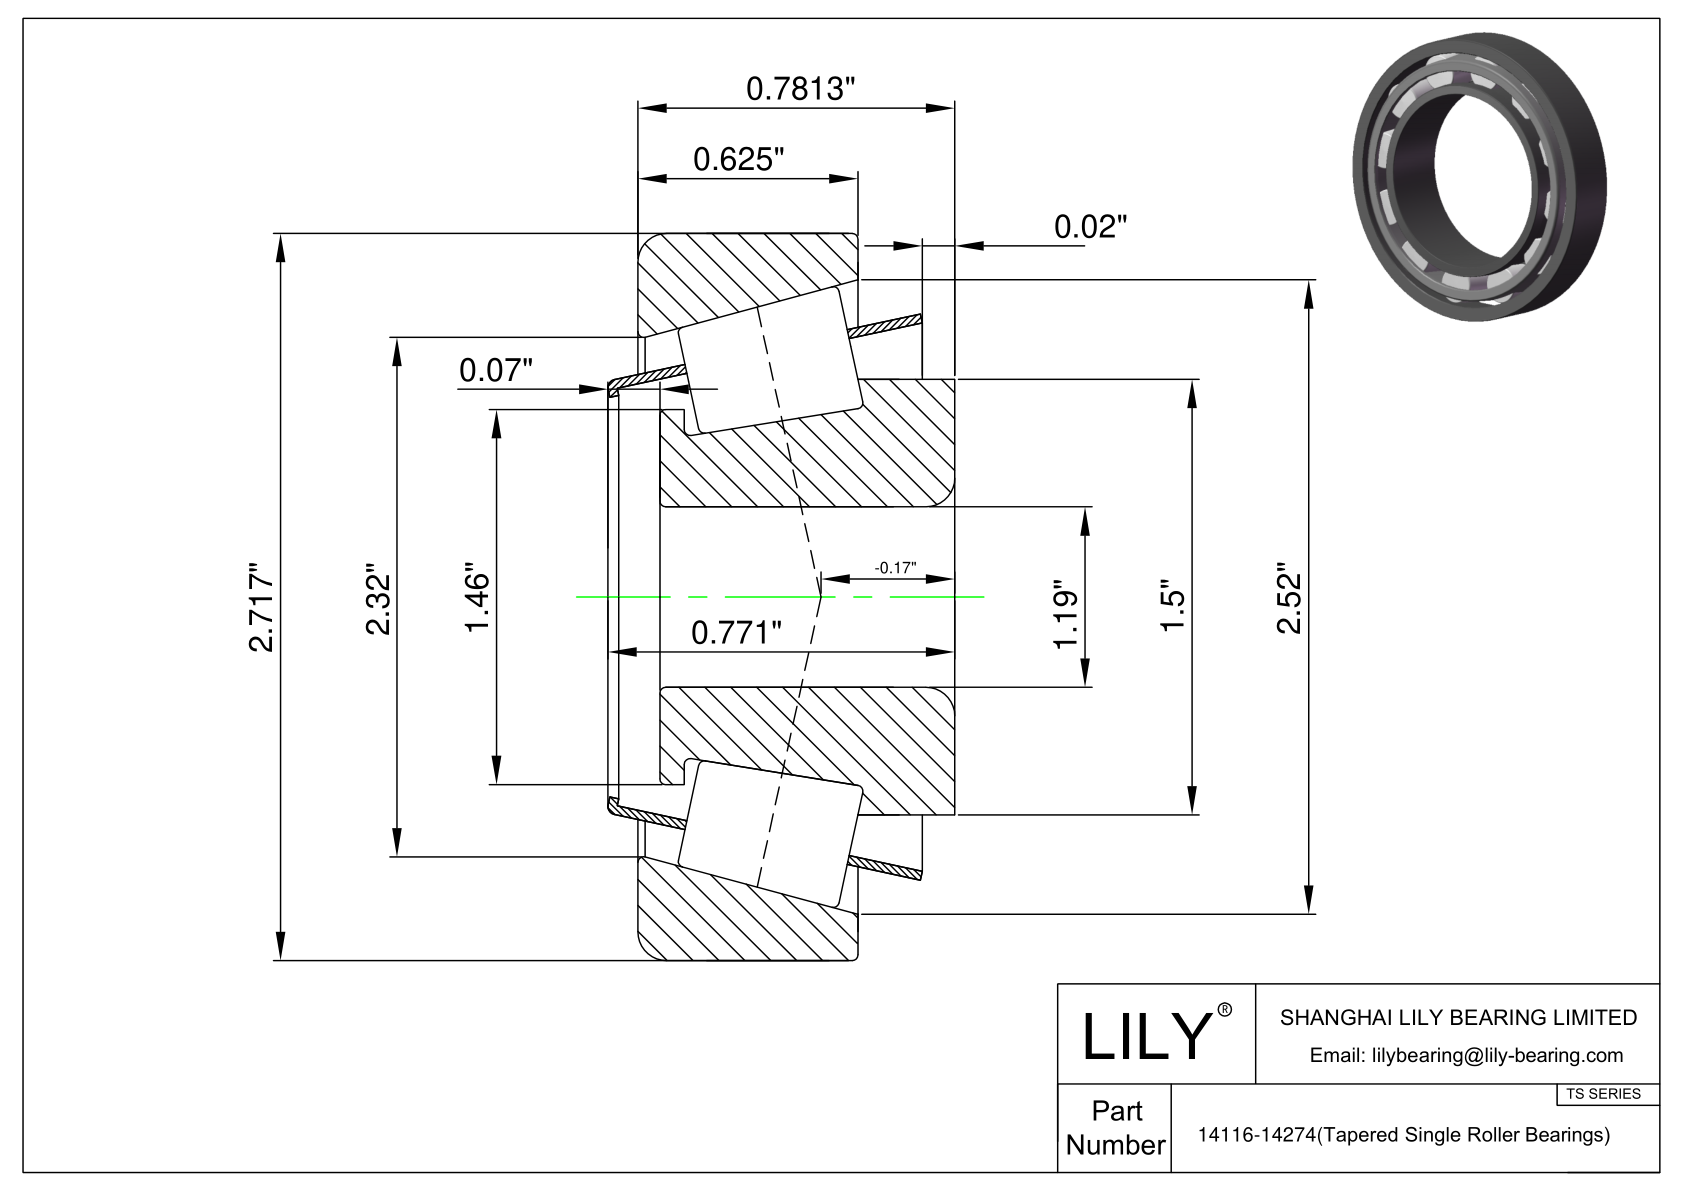 14116-14274 TS (Tapered Single Roller Bearings) (Imperial) cad drawing